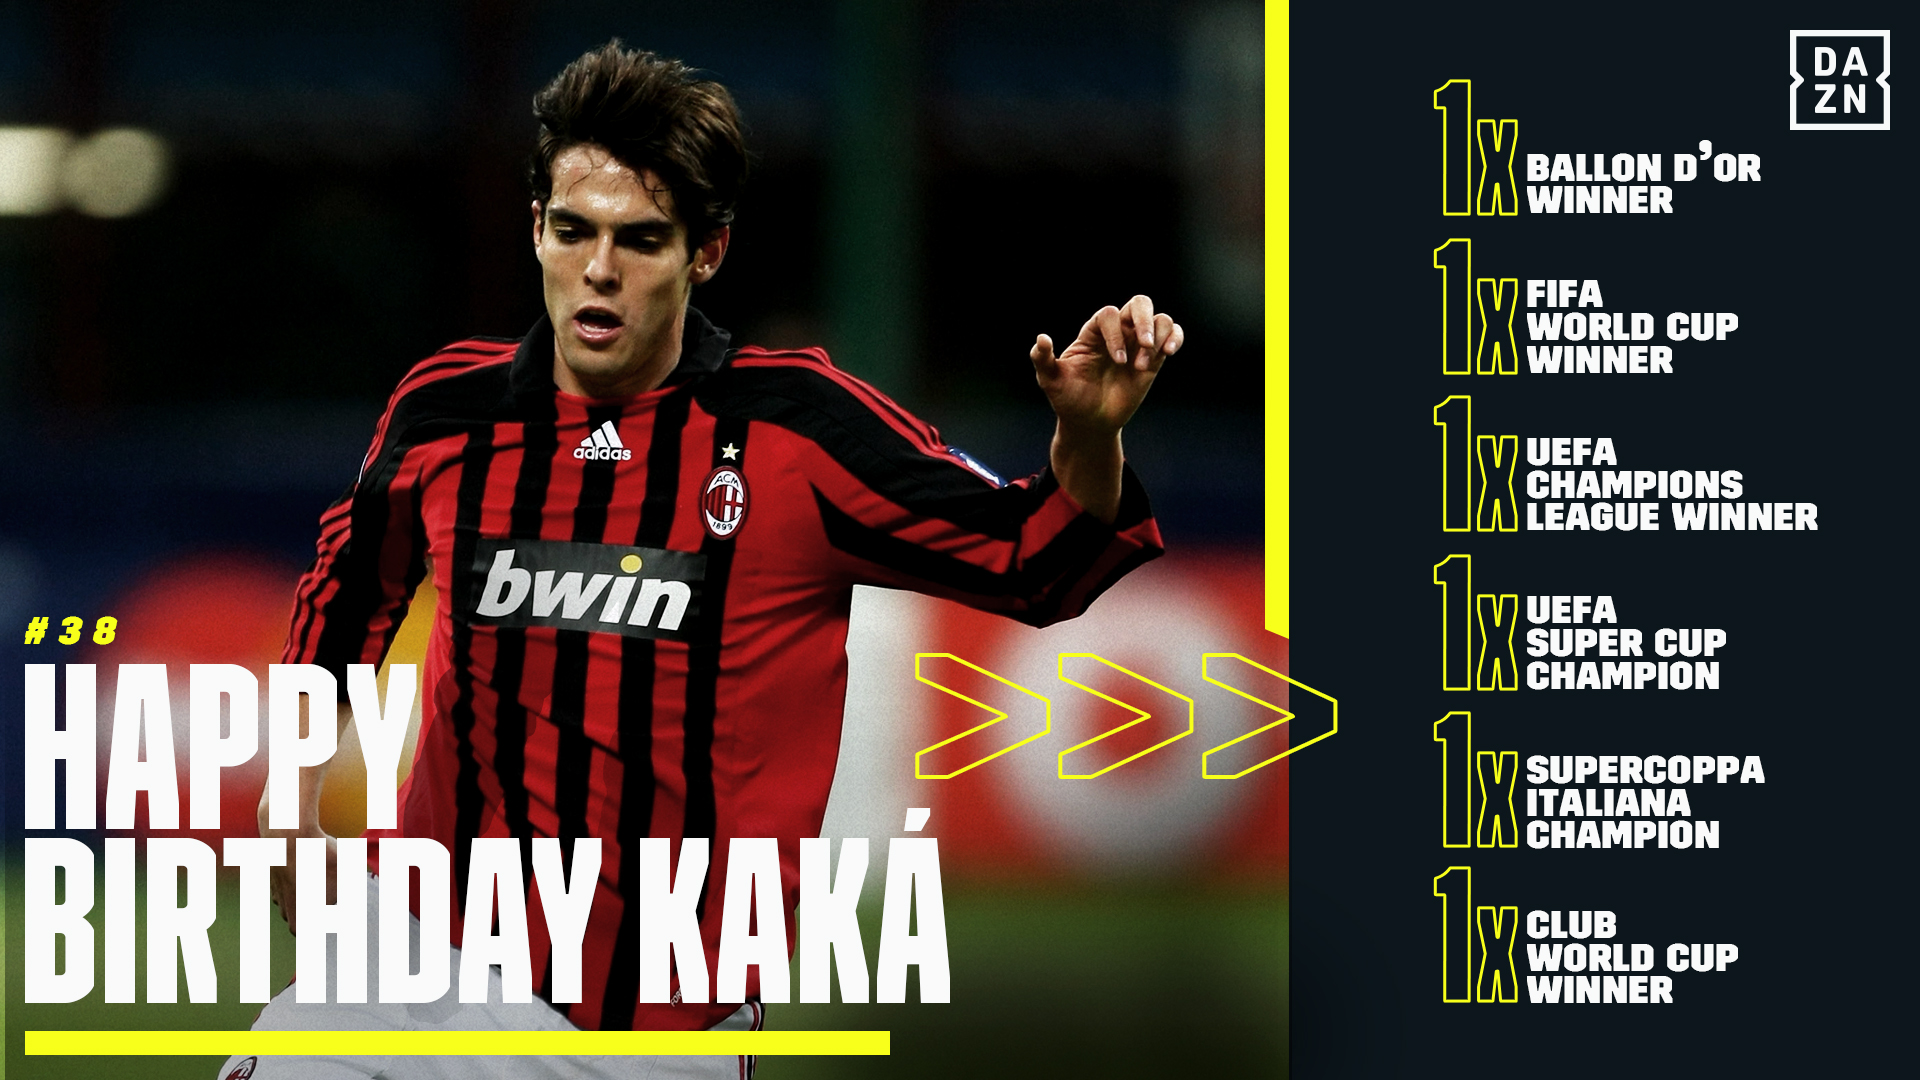 Happy Birthday to a legend of the game and an inspiration to young players everywhere Kaká! 